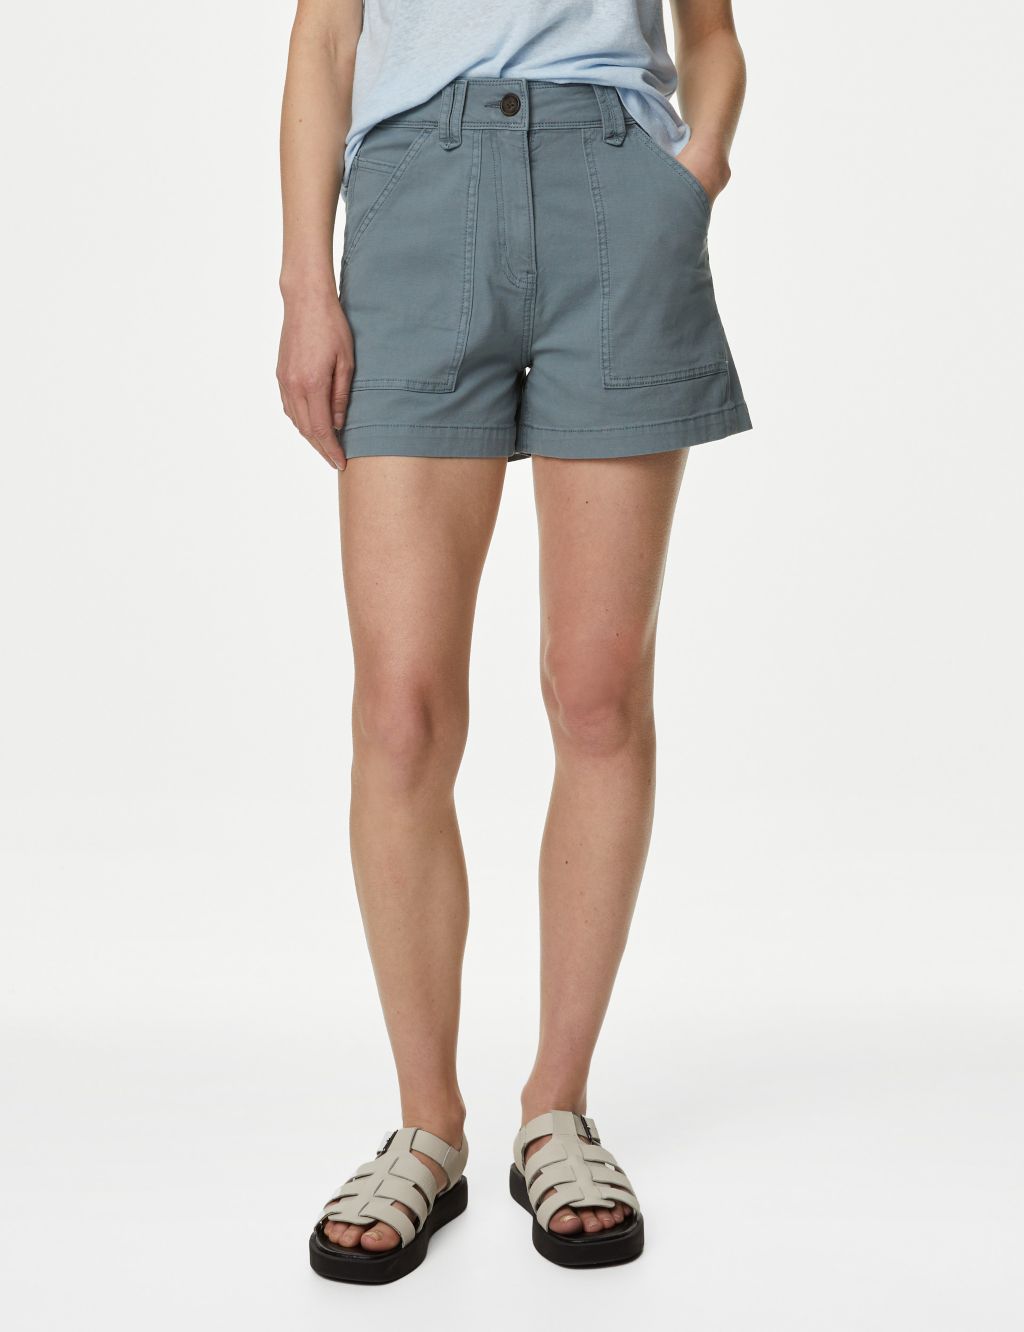 Cotton Rich High Waisted Utility Shorts image 2